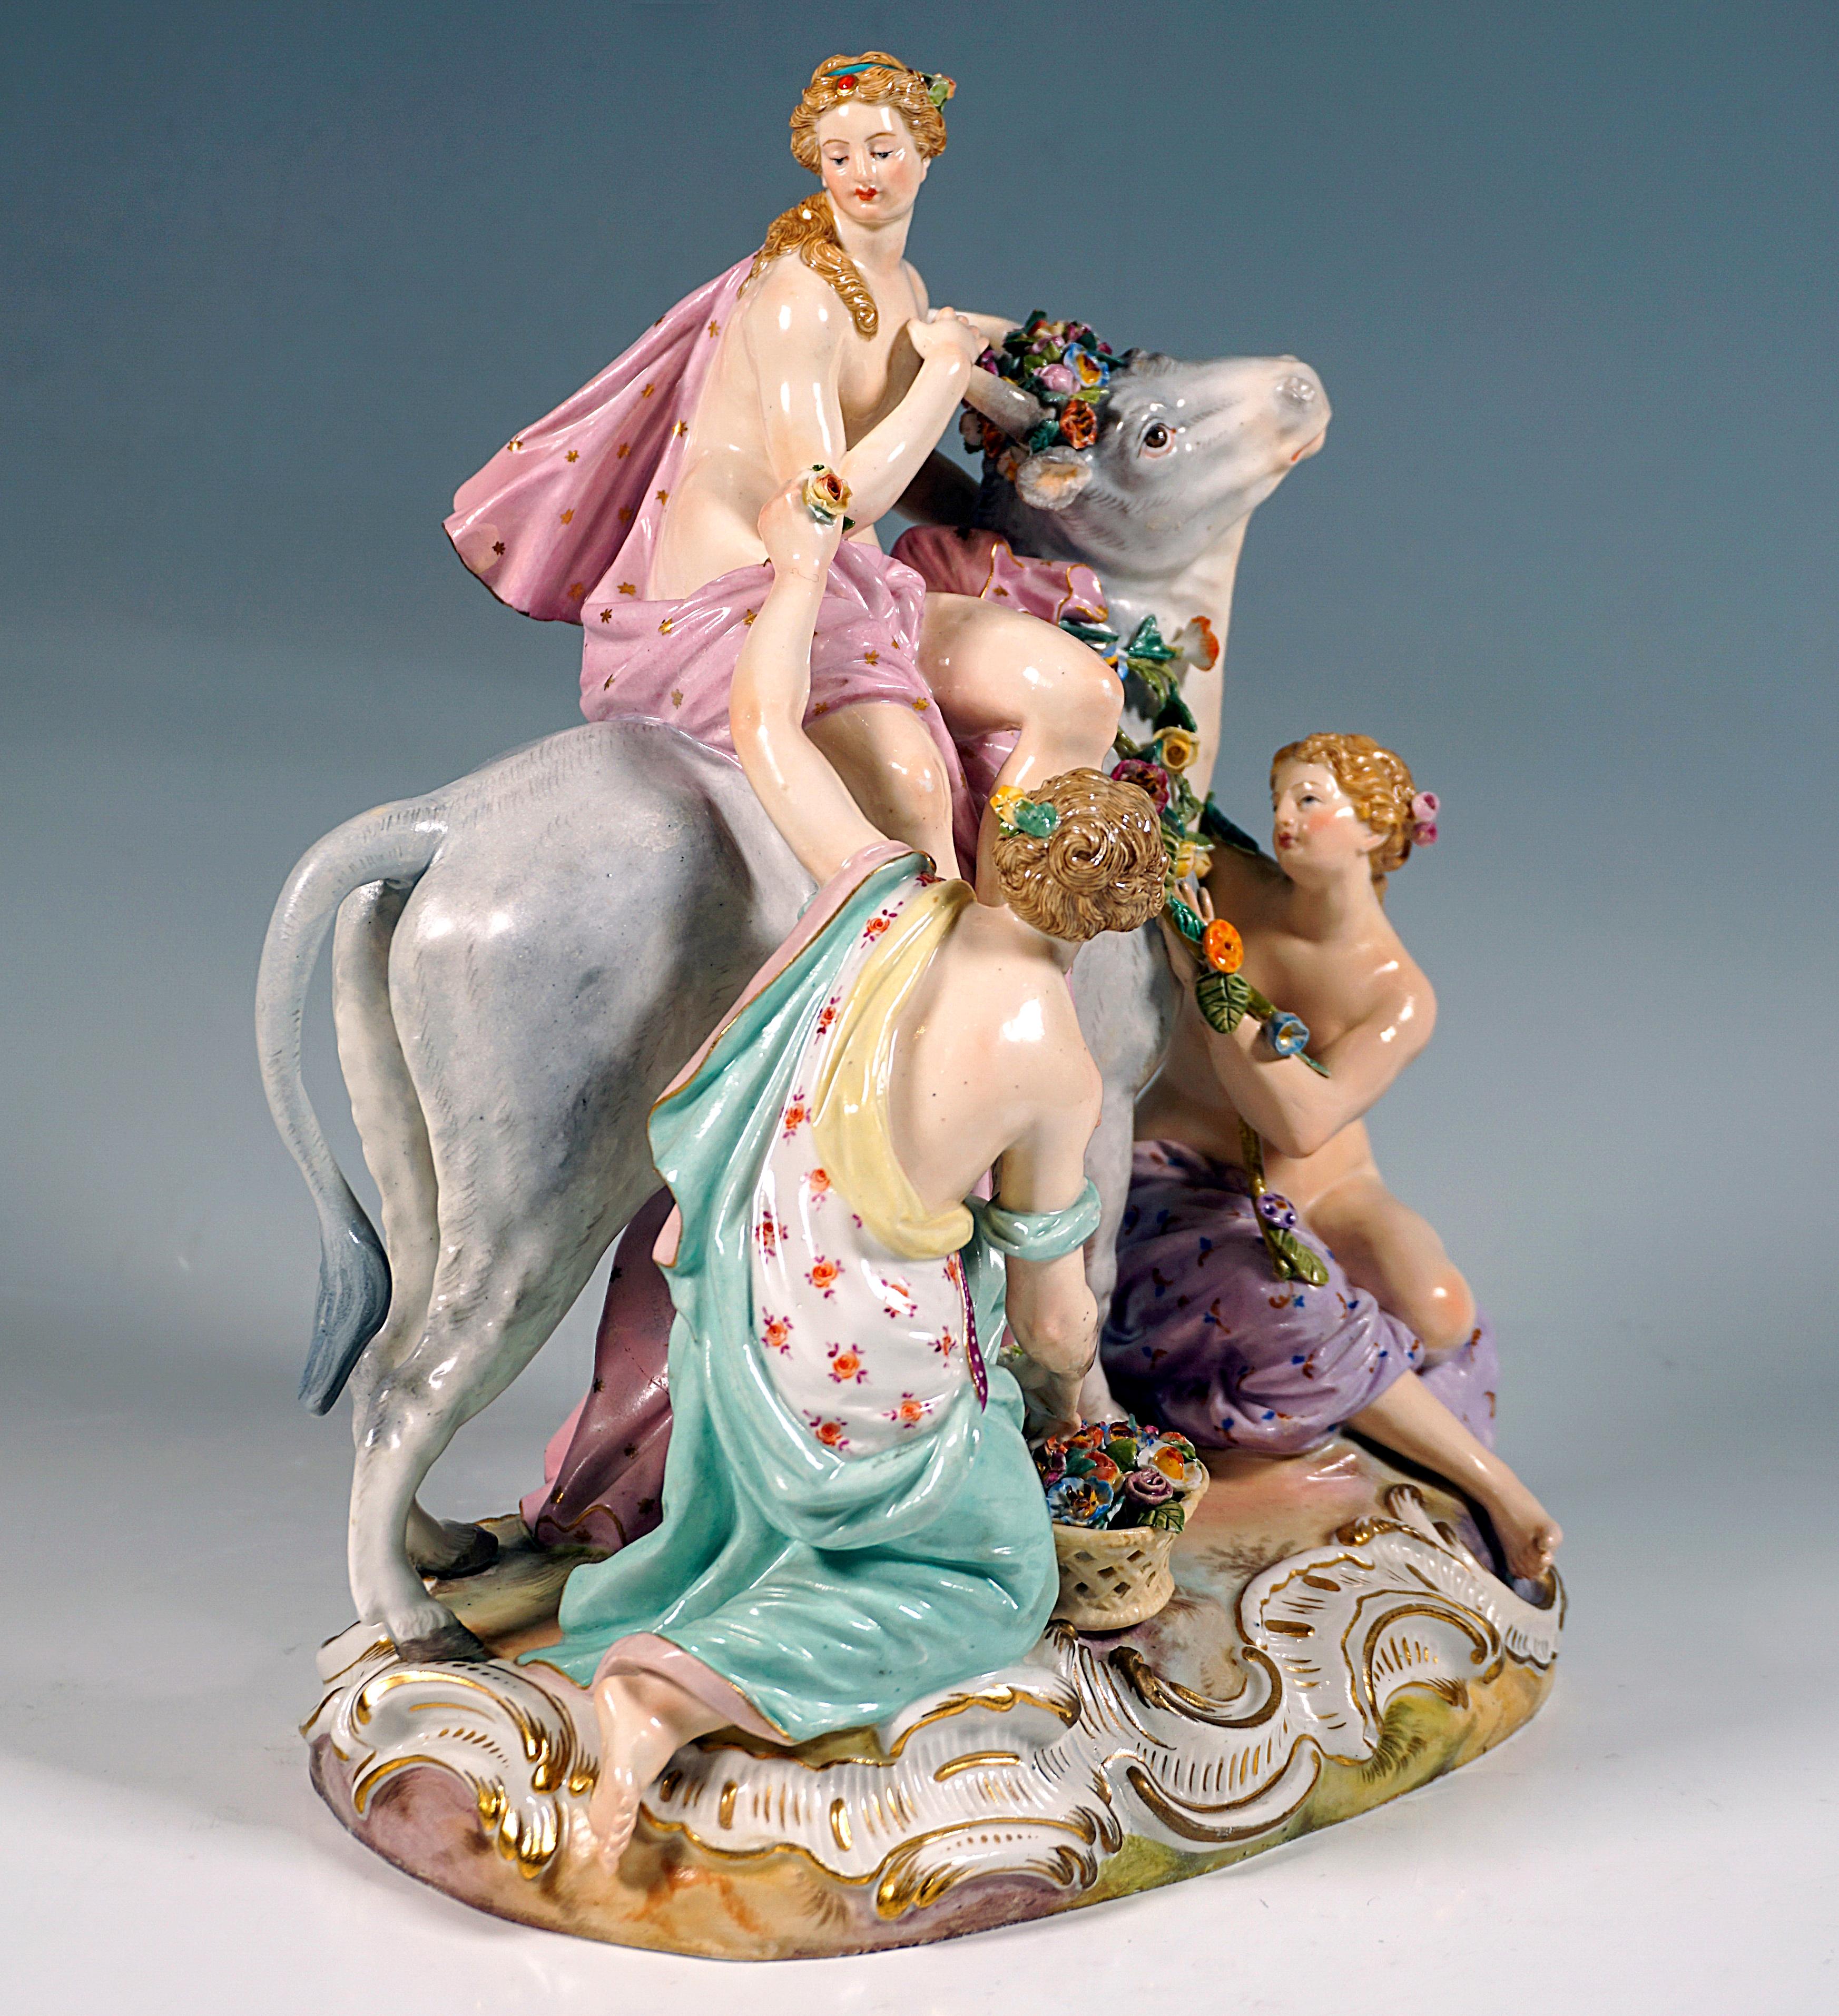 Excellent large meissen figurine group around 1860:
Beautiful, youthful Europe, the primordial mother of the continent, with her hair tied back and adorned with flowers, sits sideways on the strong, white bull, which is actually the transformed